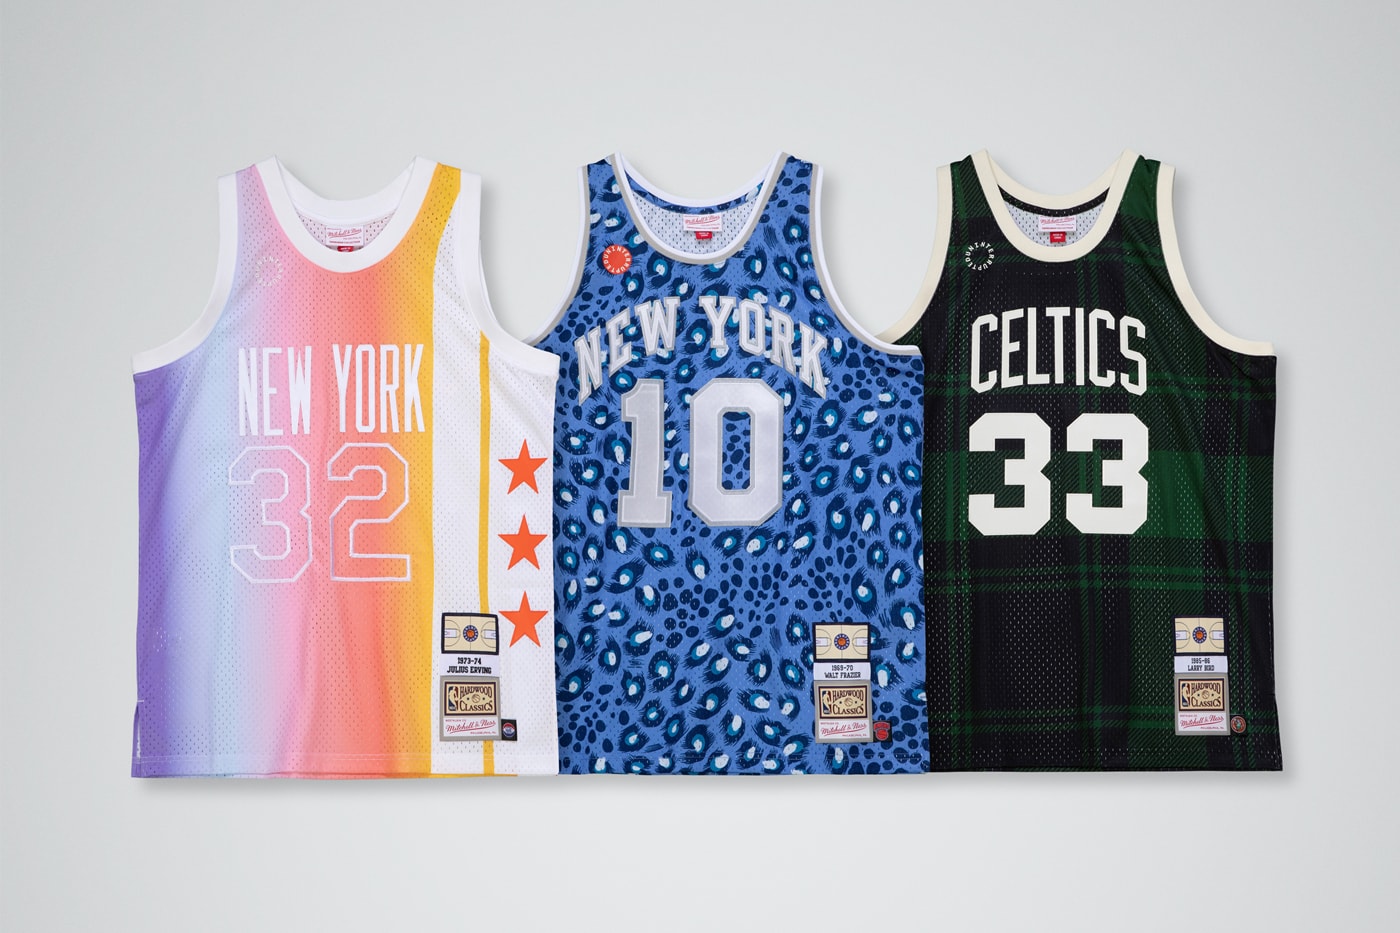 uninterrupted mitchell and ness collab collection release info walt clyde frazier julius dr. J erving larry bird more than an athlete personal story jersey shorts team t shirt cap 